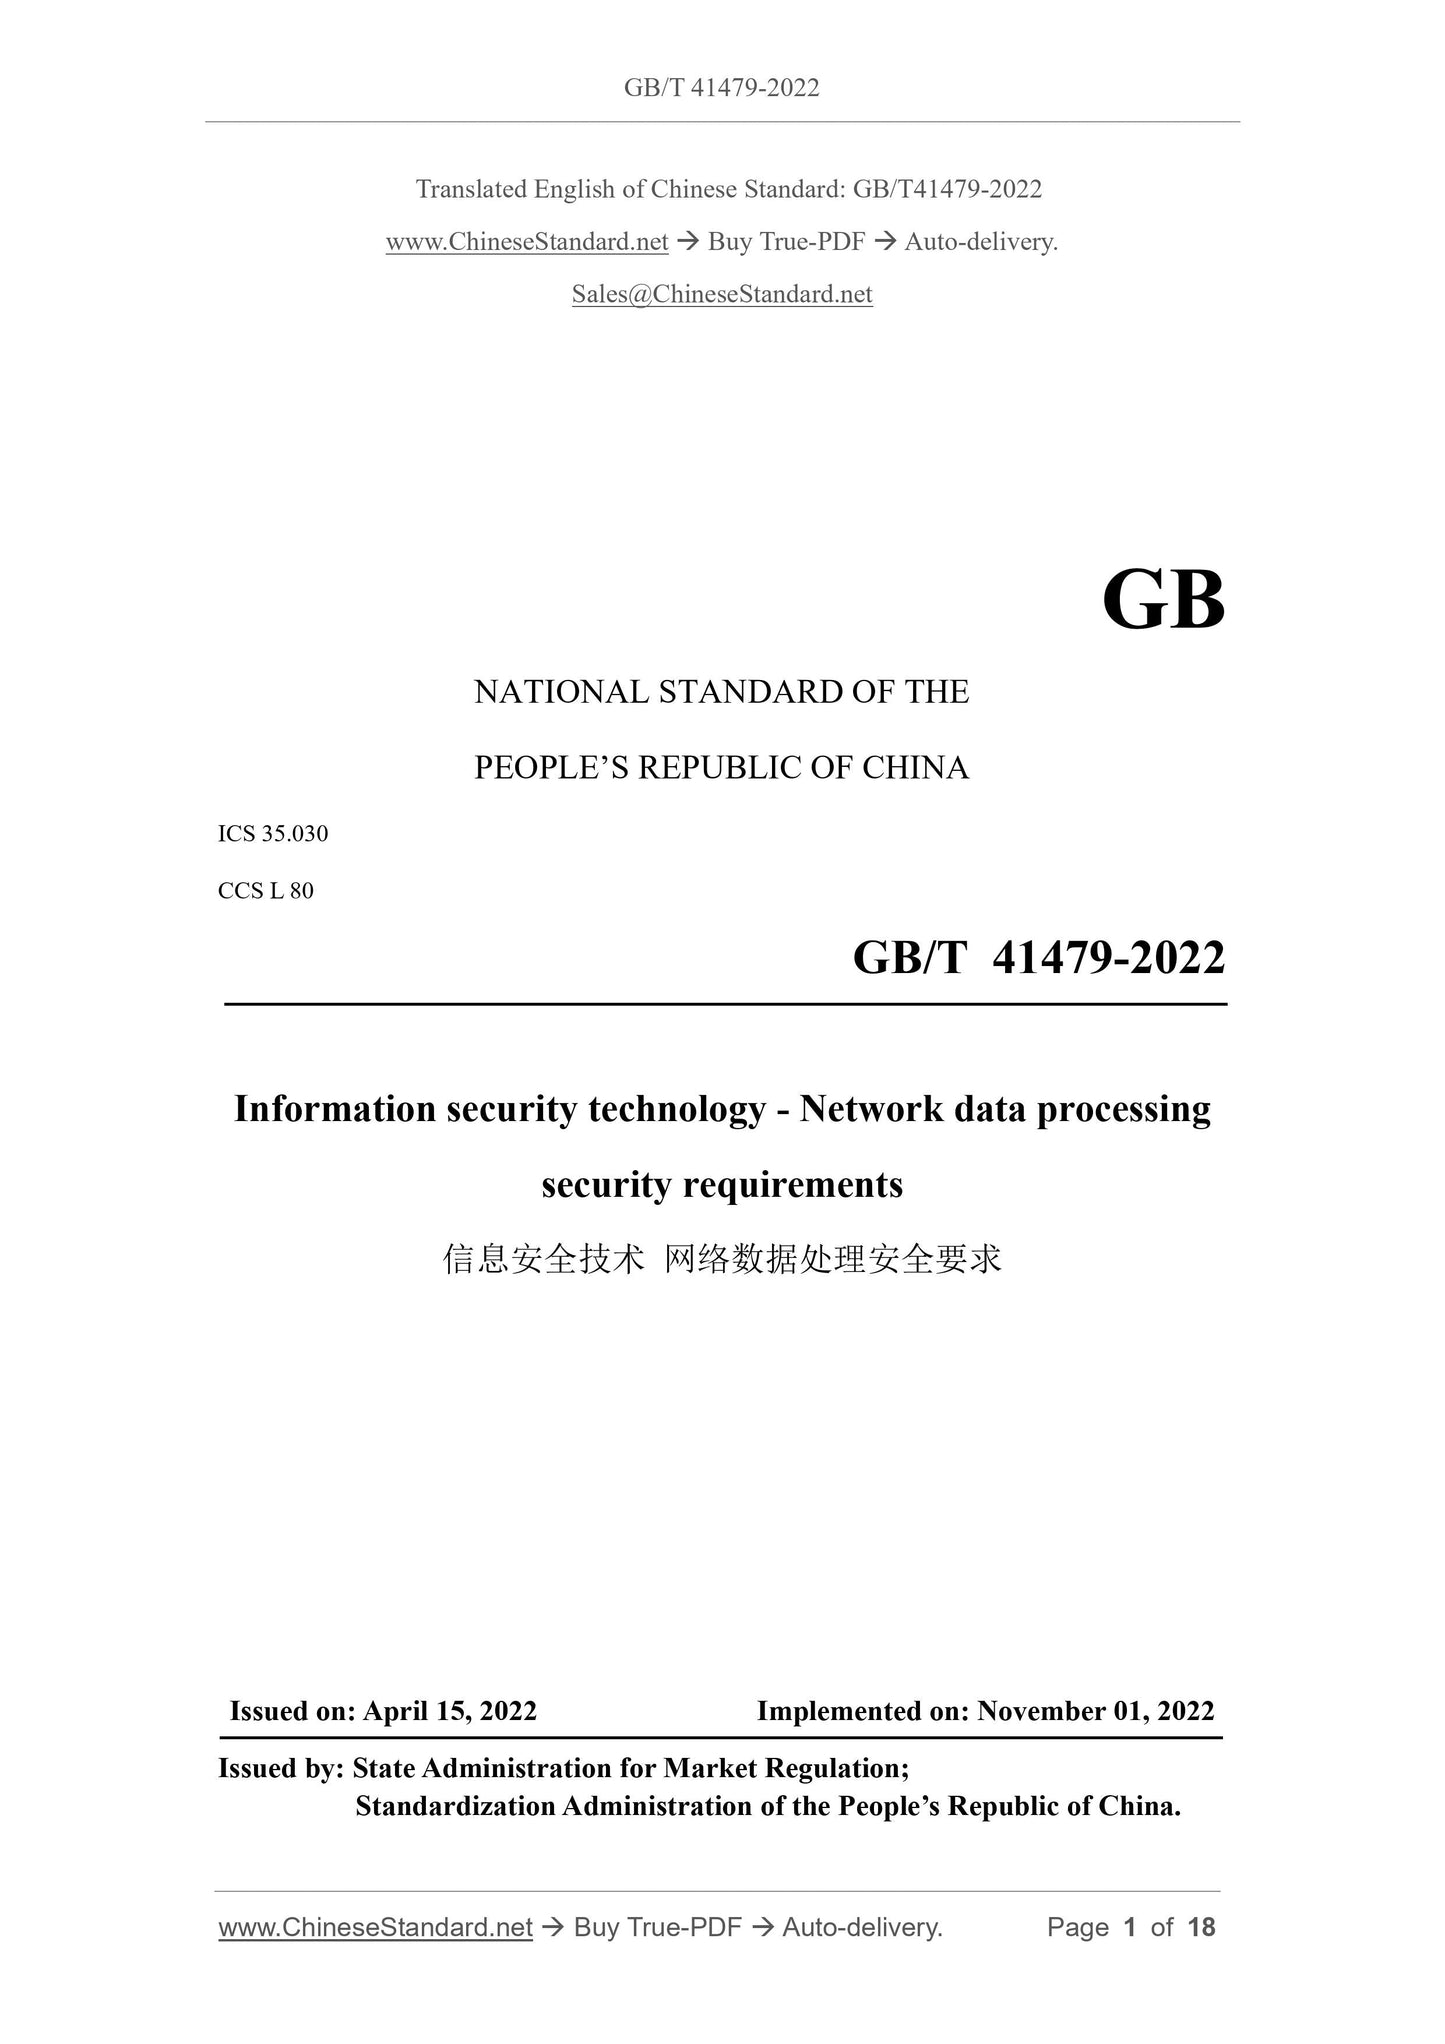 GB/T 41479-2022 Page 1